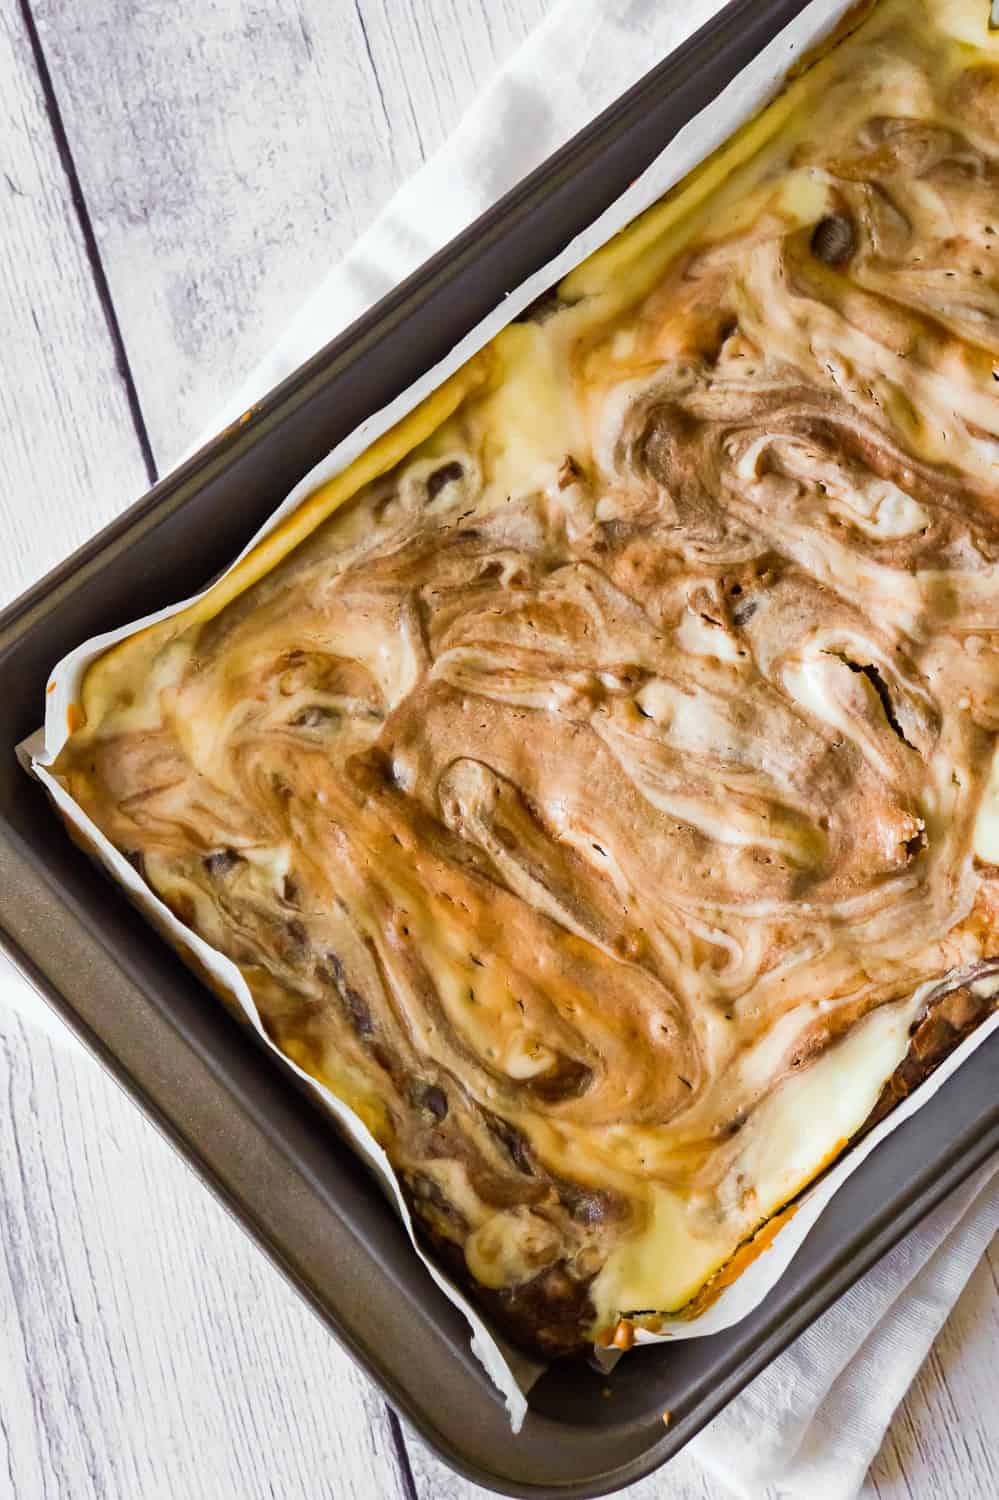 Brownies with Cream Cheese are a decadent chocolate dessert loaded with chocolate chips and a rich cheesecake swirl.